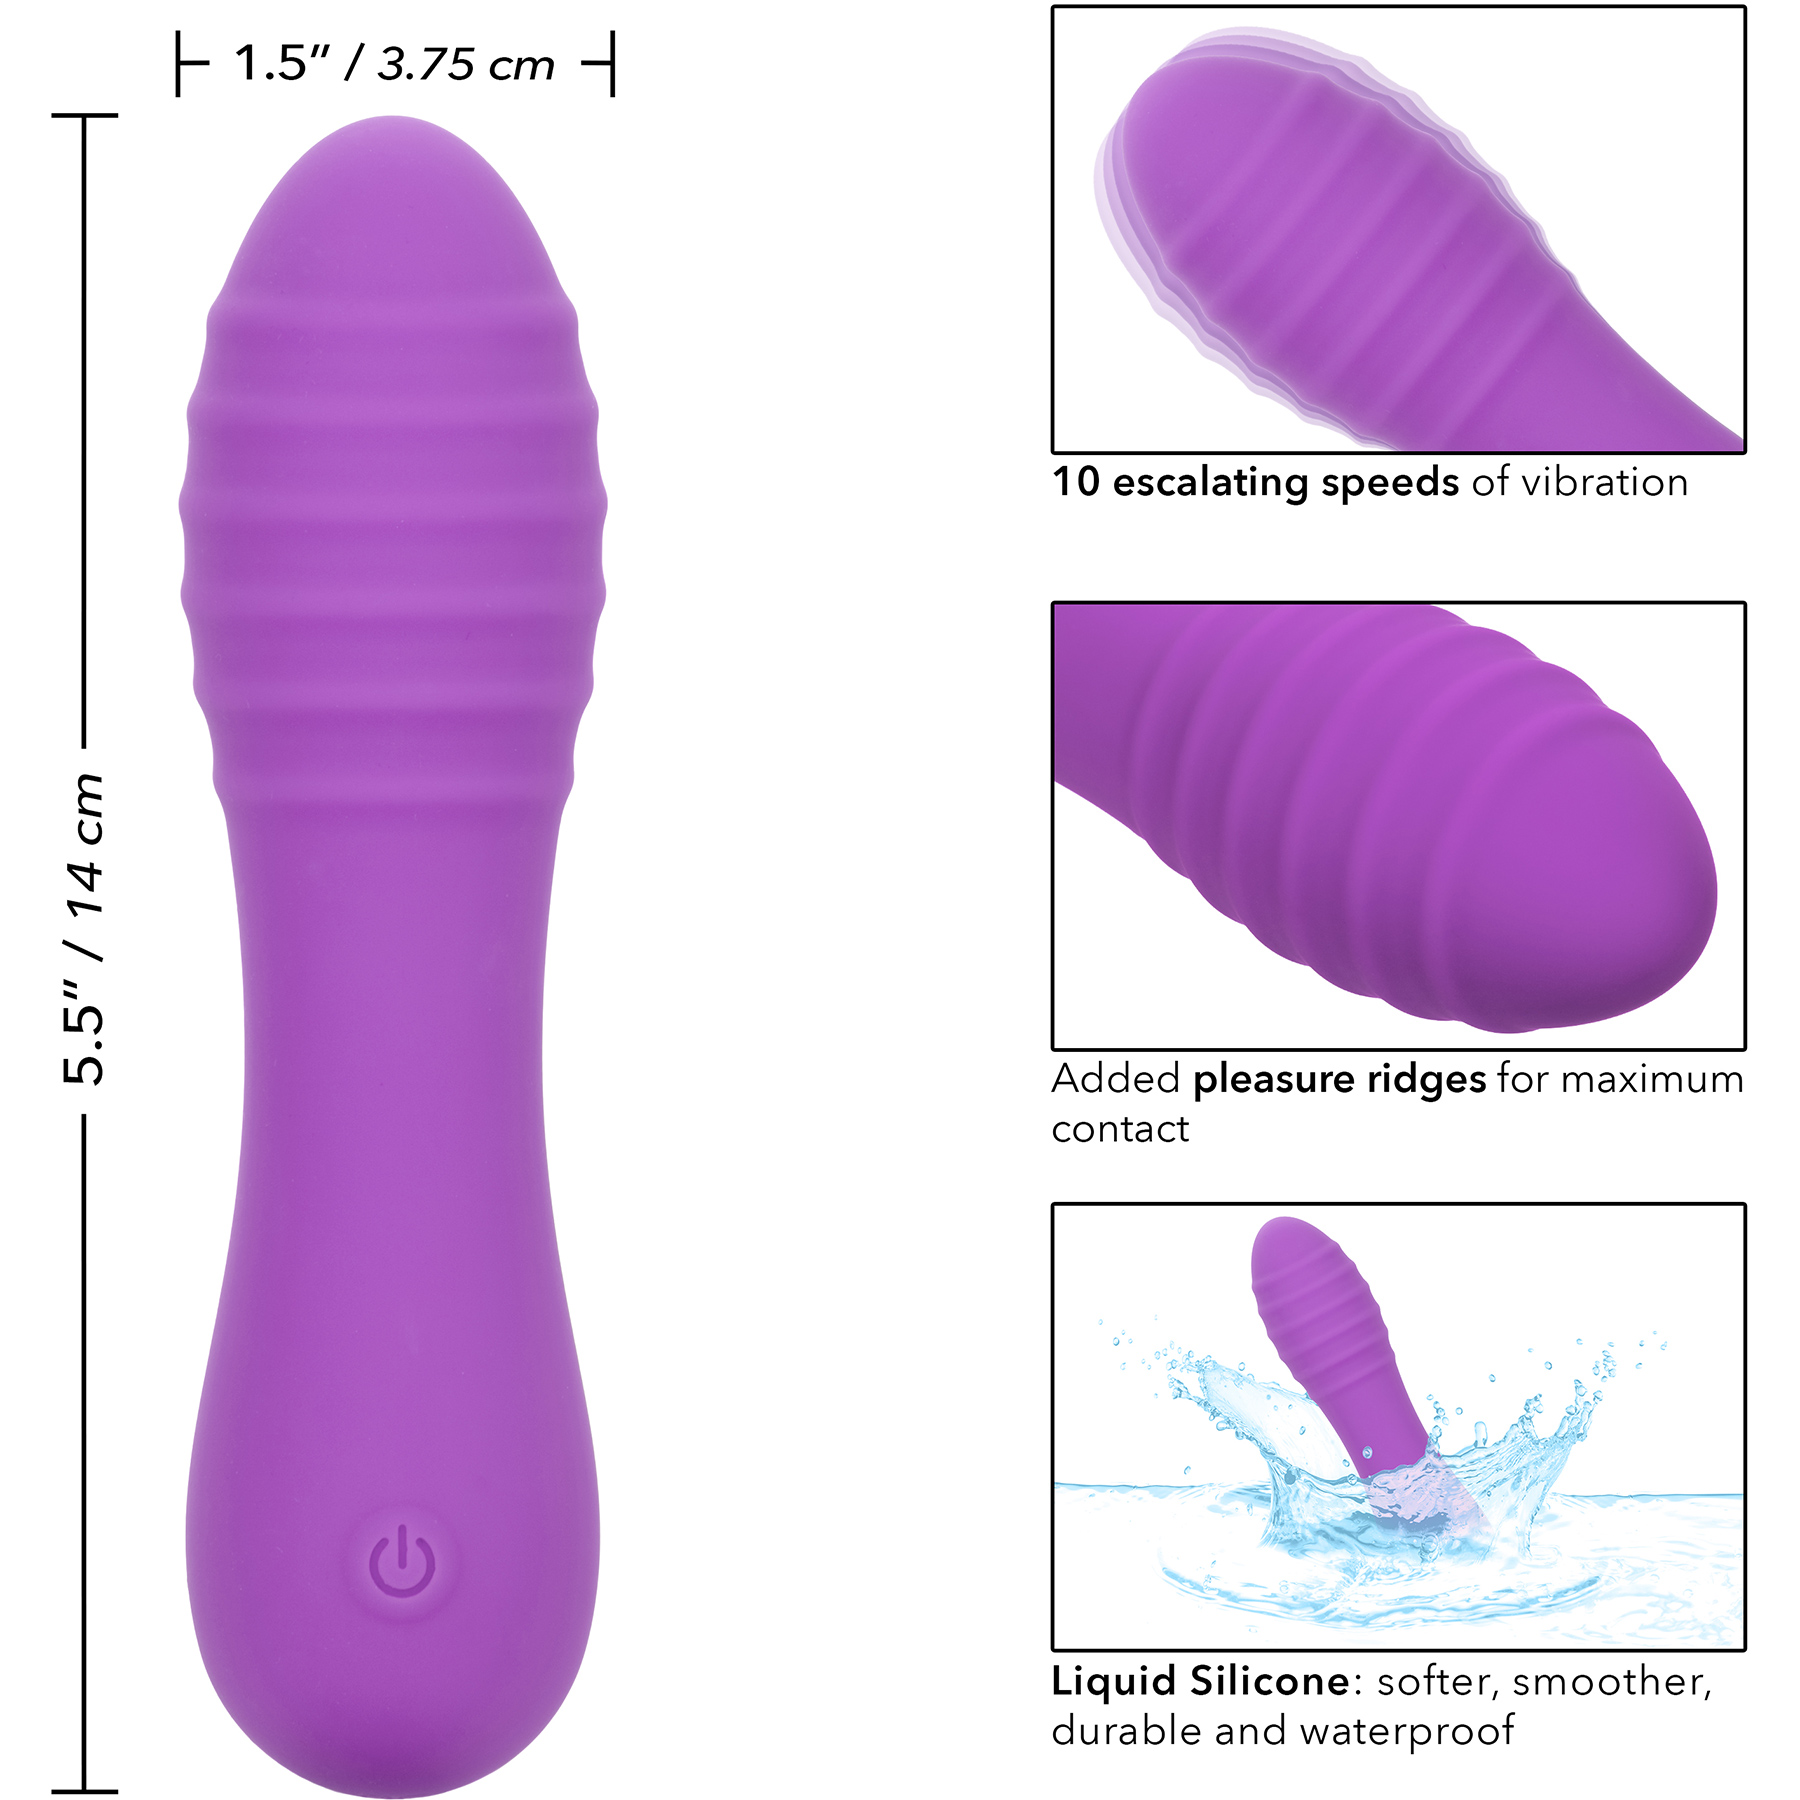 Bliss Liquid Silicone Ripple Rechargeable Waterproof Clitoral Vibrator - Measurements